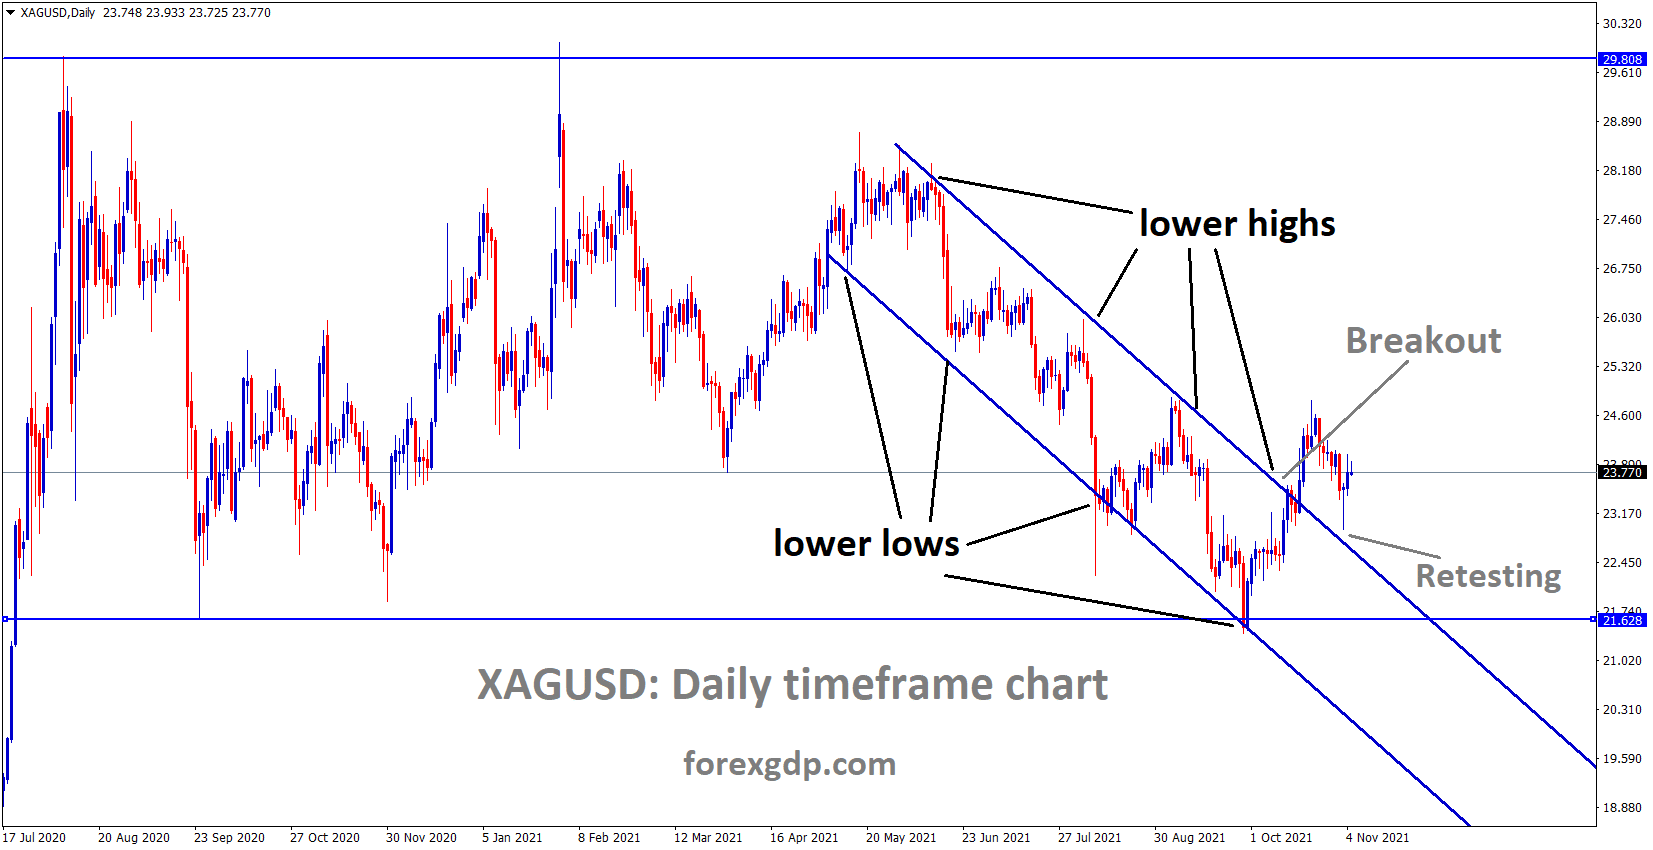 XAGUSD Silver price has broken the Descending channel and now market retesting